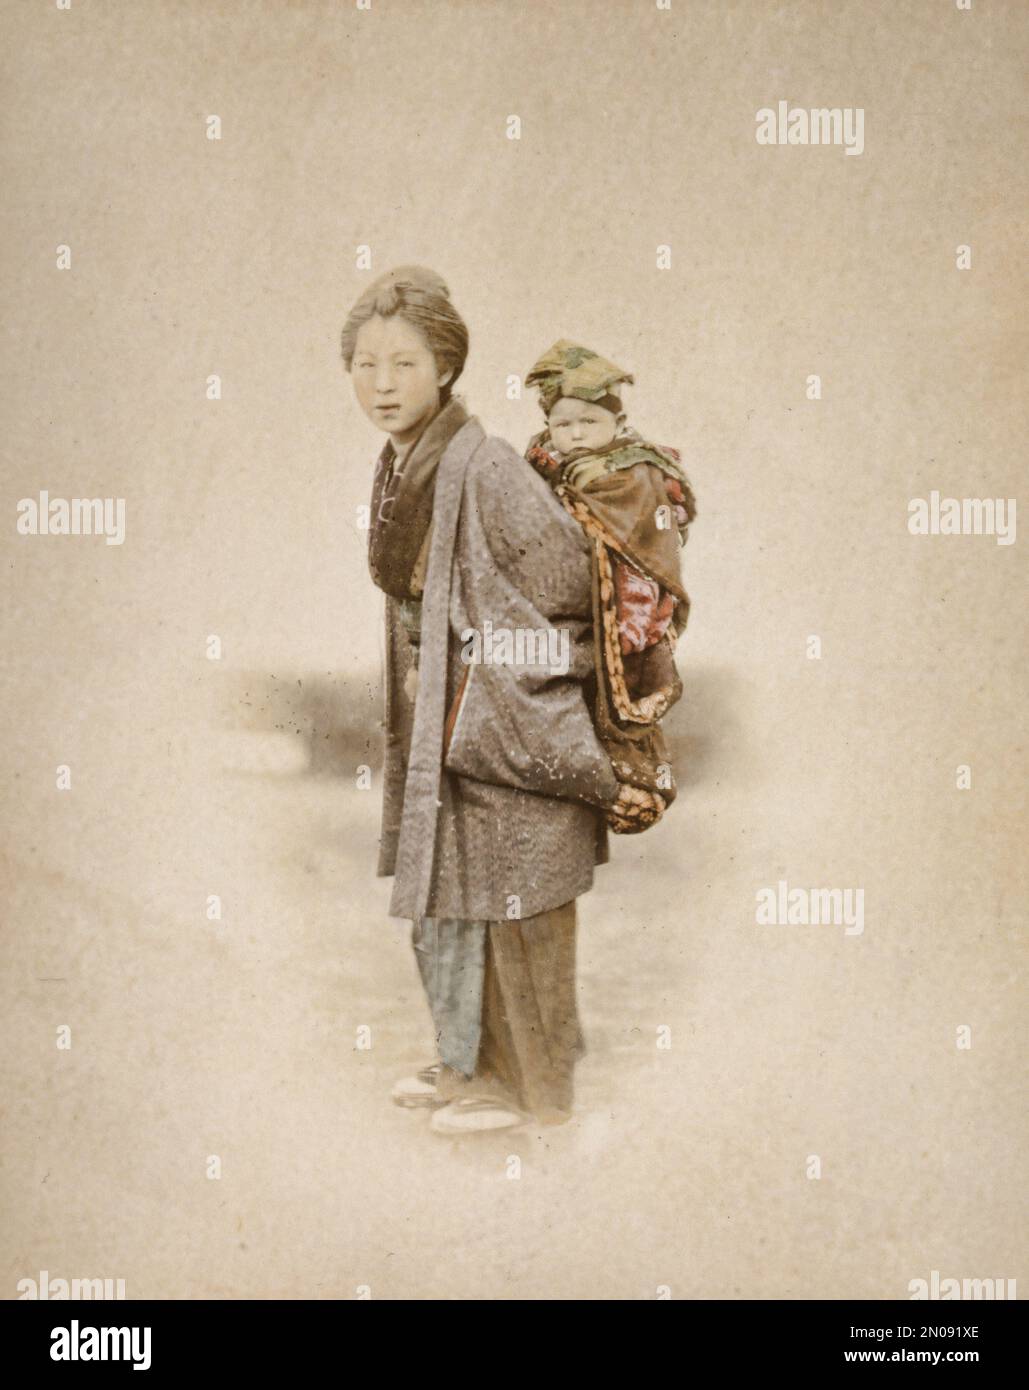 A photograph of a Japanese mother and child, published in Views & Costumes of Japan by Stillfried and Andersen (Yokohama, 1877). Stock Photo